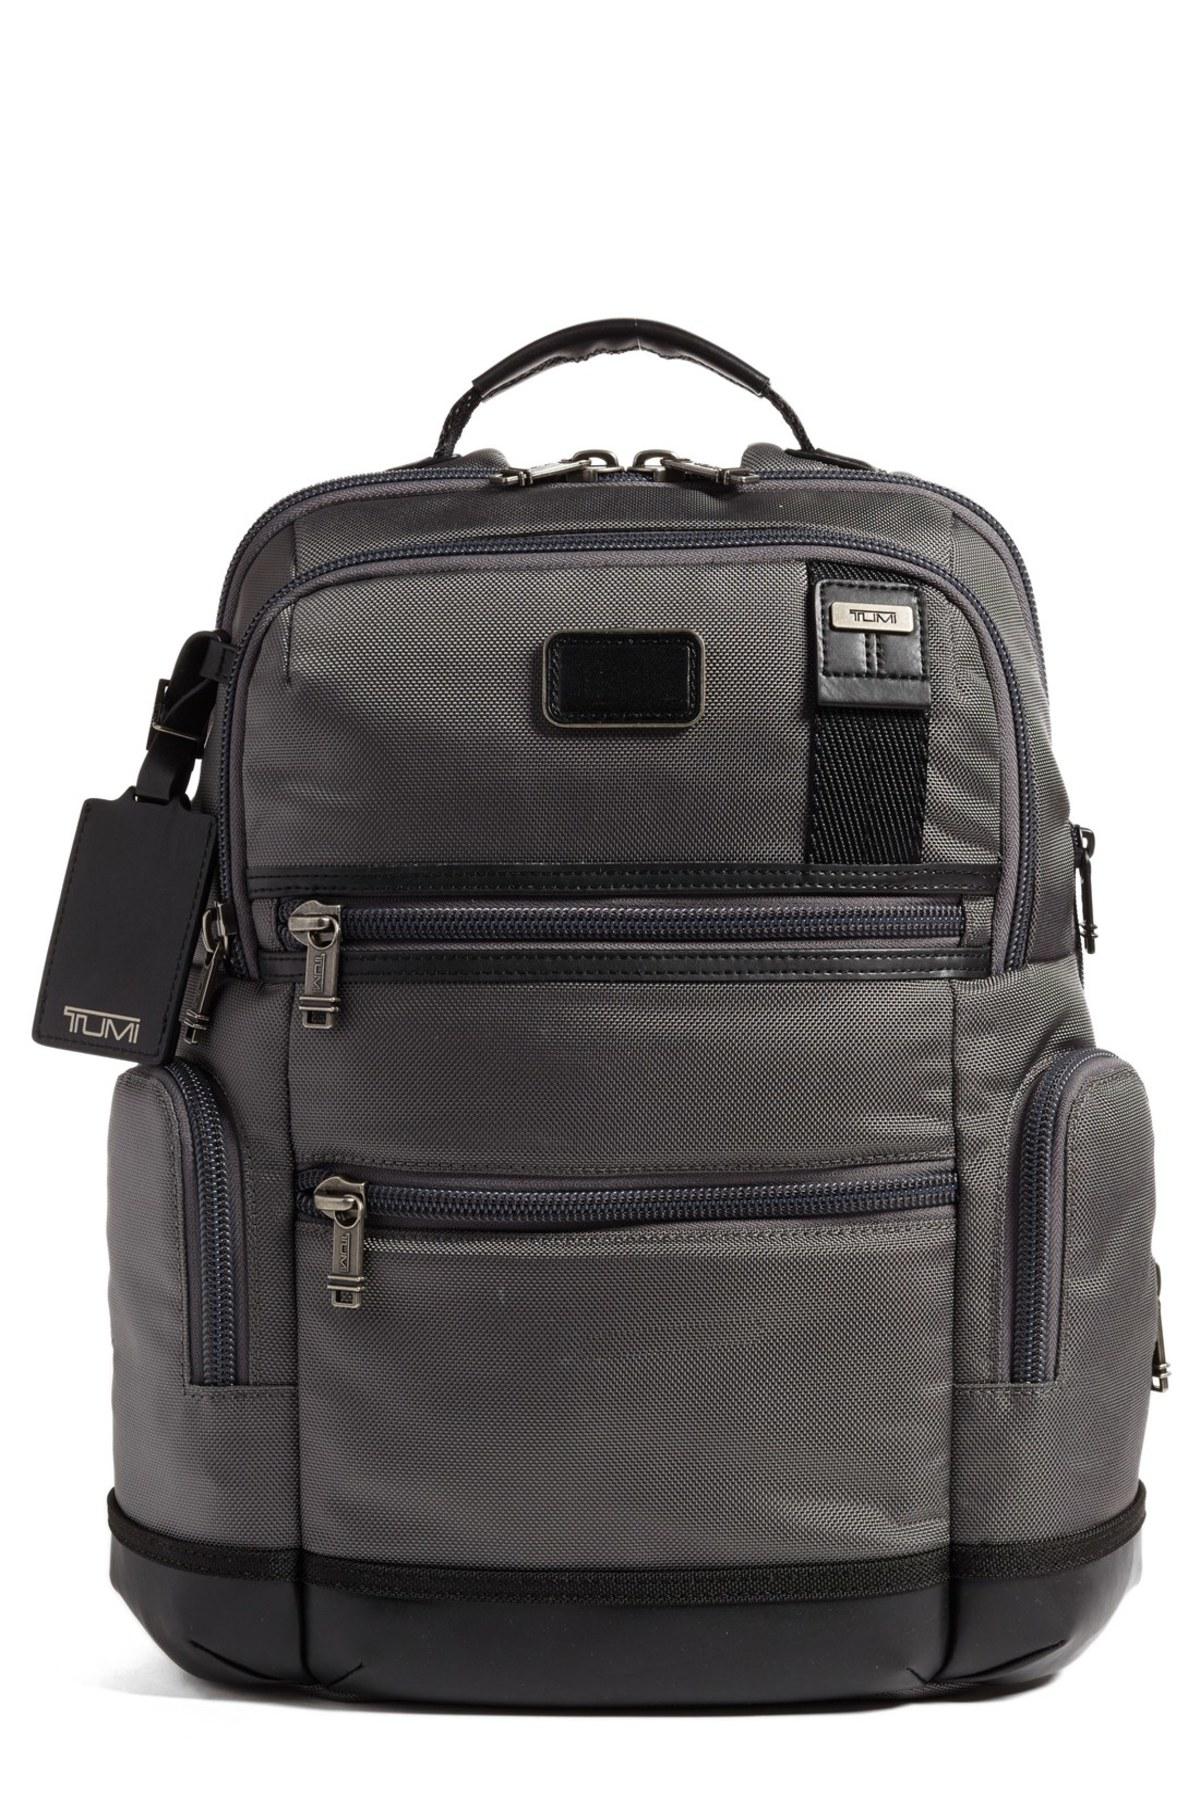 Tumi Synthetic 'alpha Bravo - Knox' Backpack in Gray for Men - Lyst